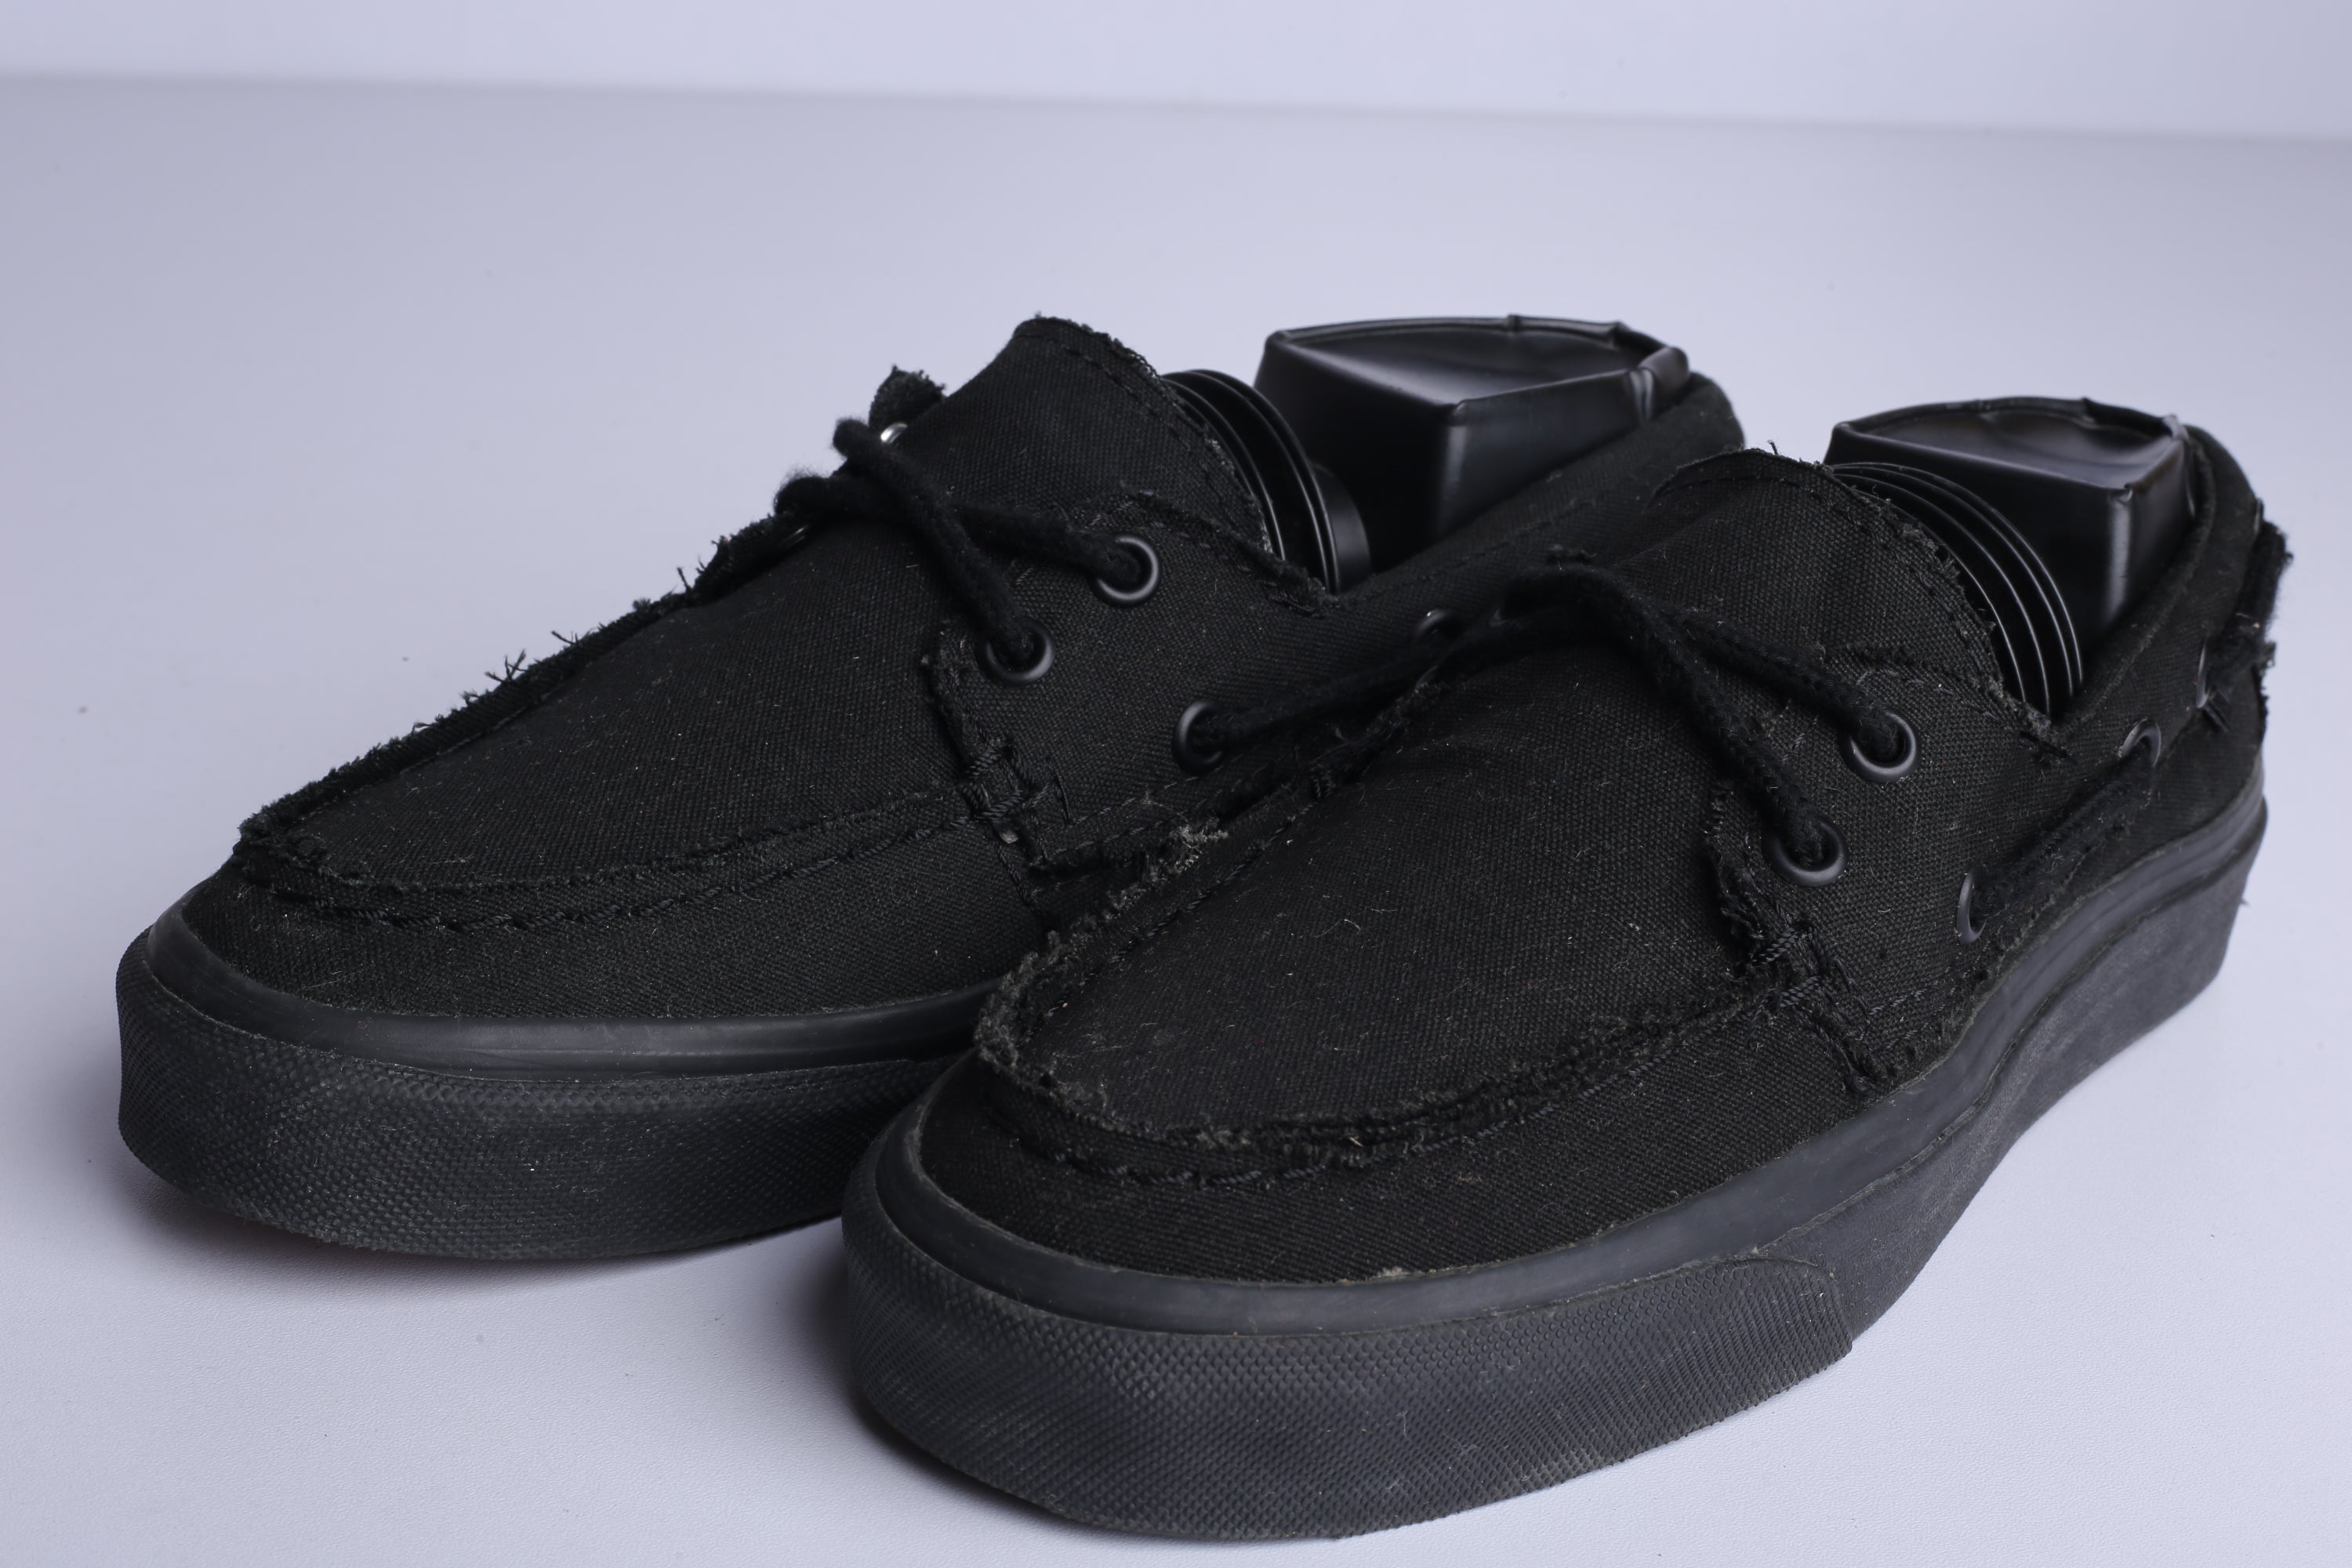 Vans Off the Wall Boat Sneaker Black - (Condition Premium)